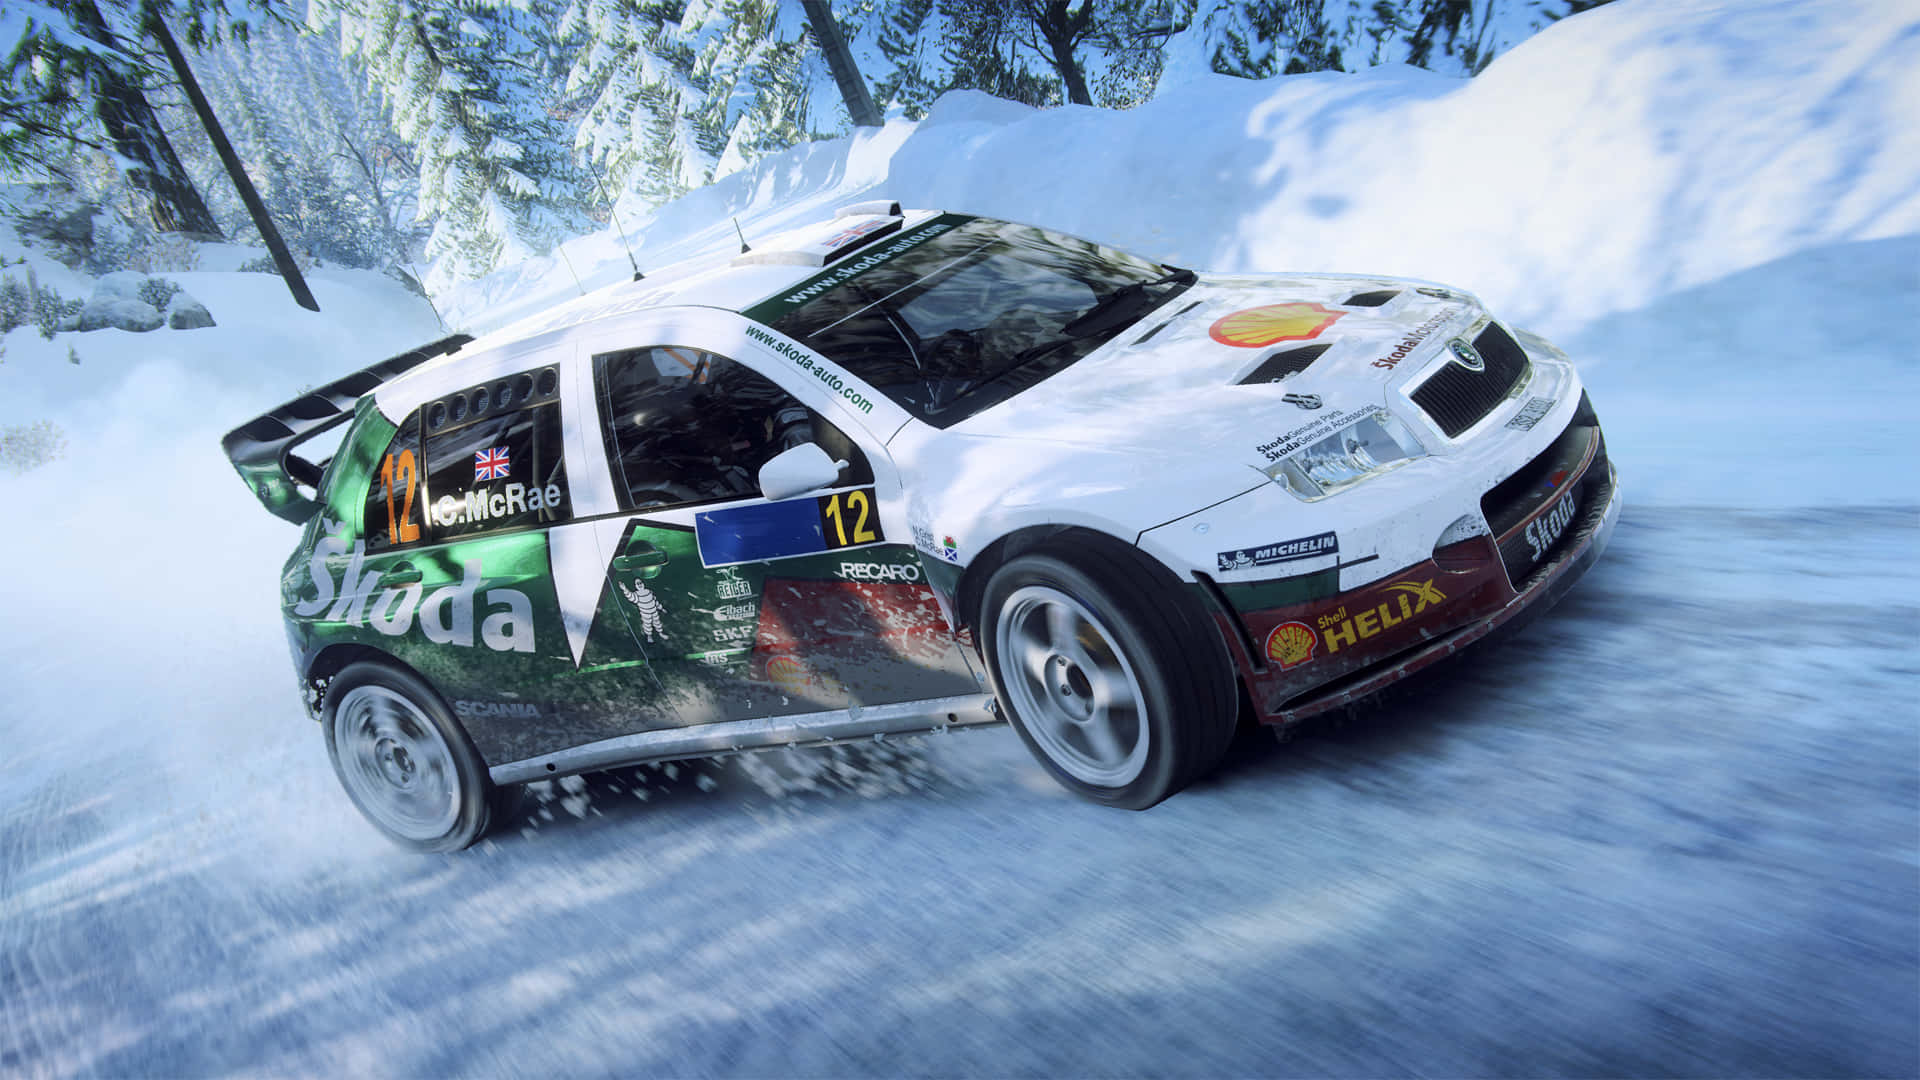 An adrenaline-charged dirt rally racing in action